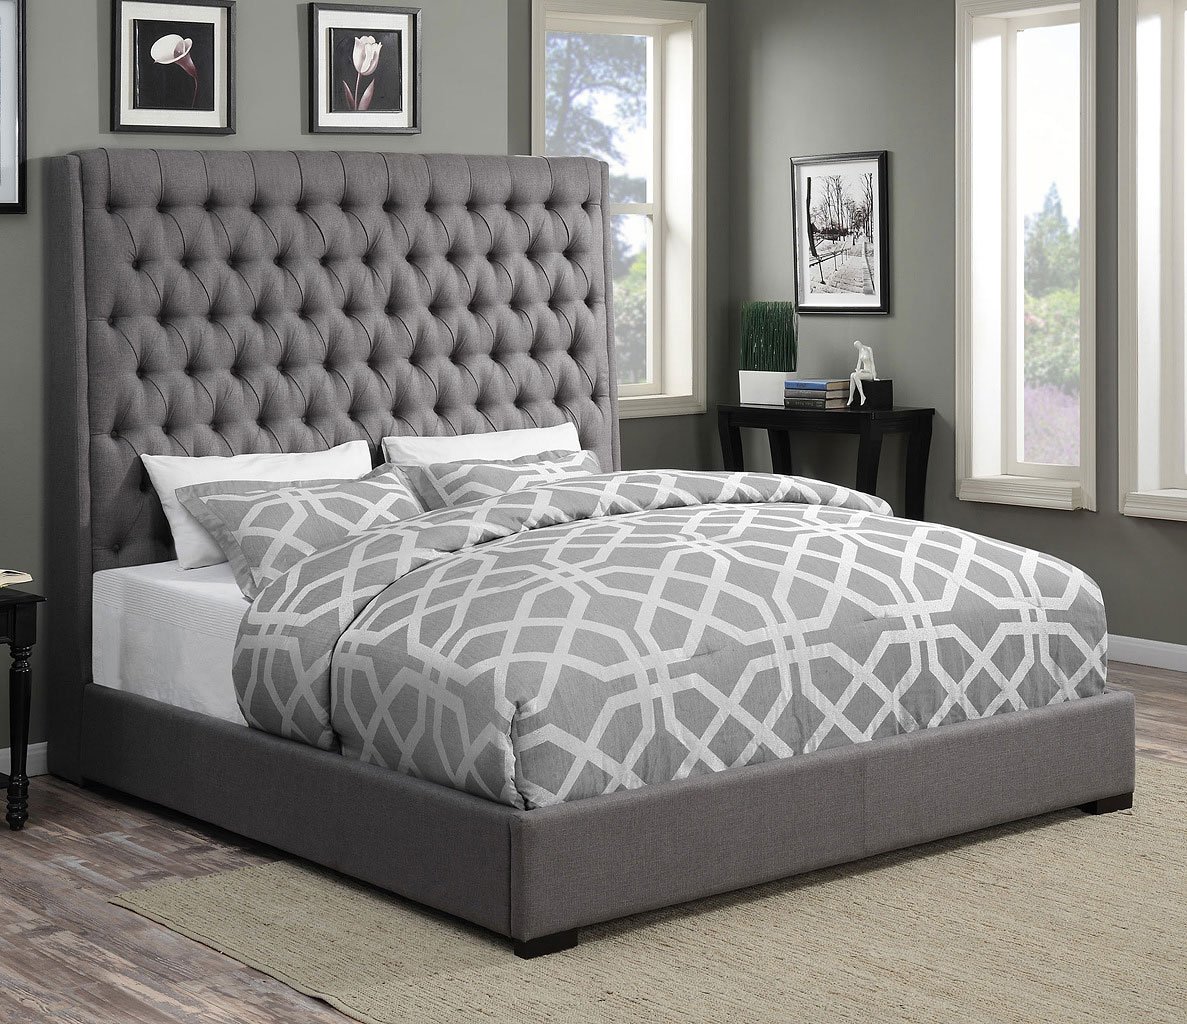 What Color Furniture Goes With Grey Upholstered Bed 